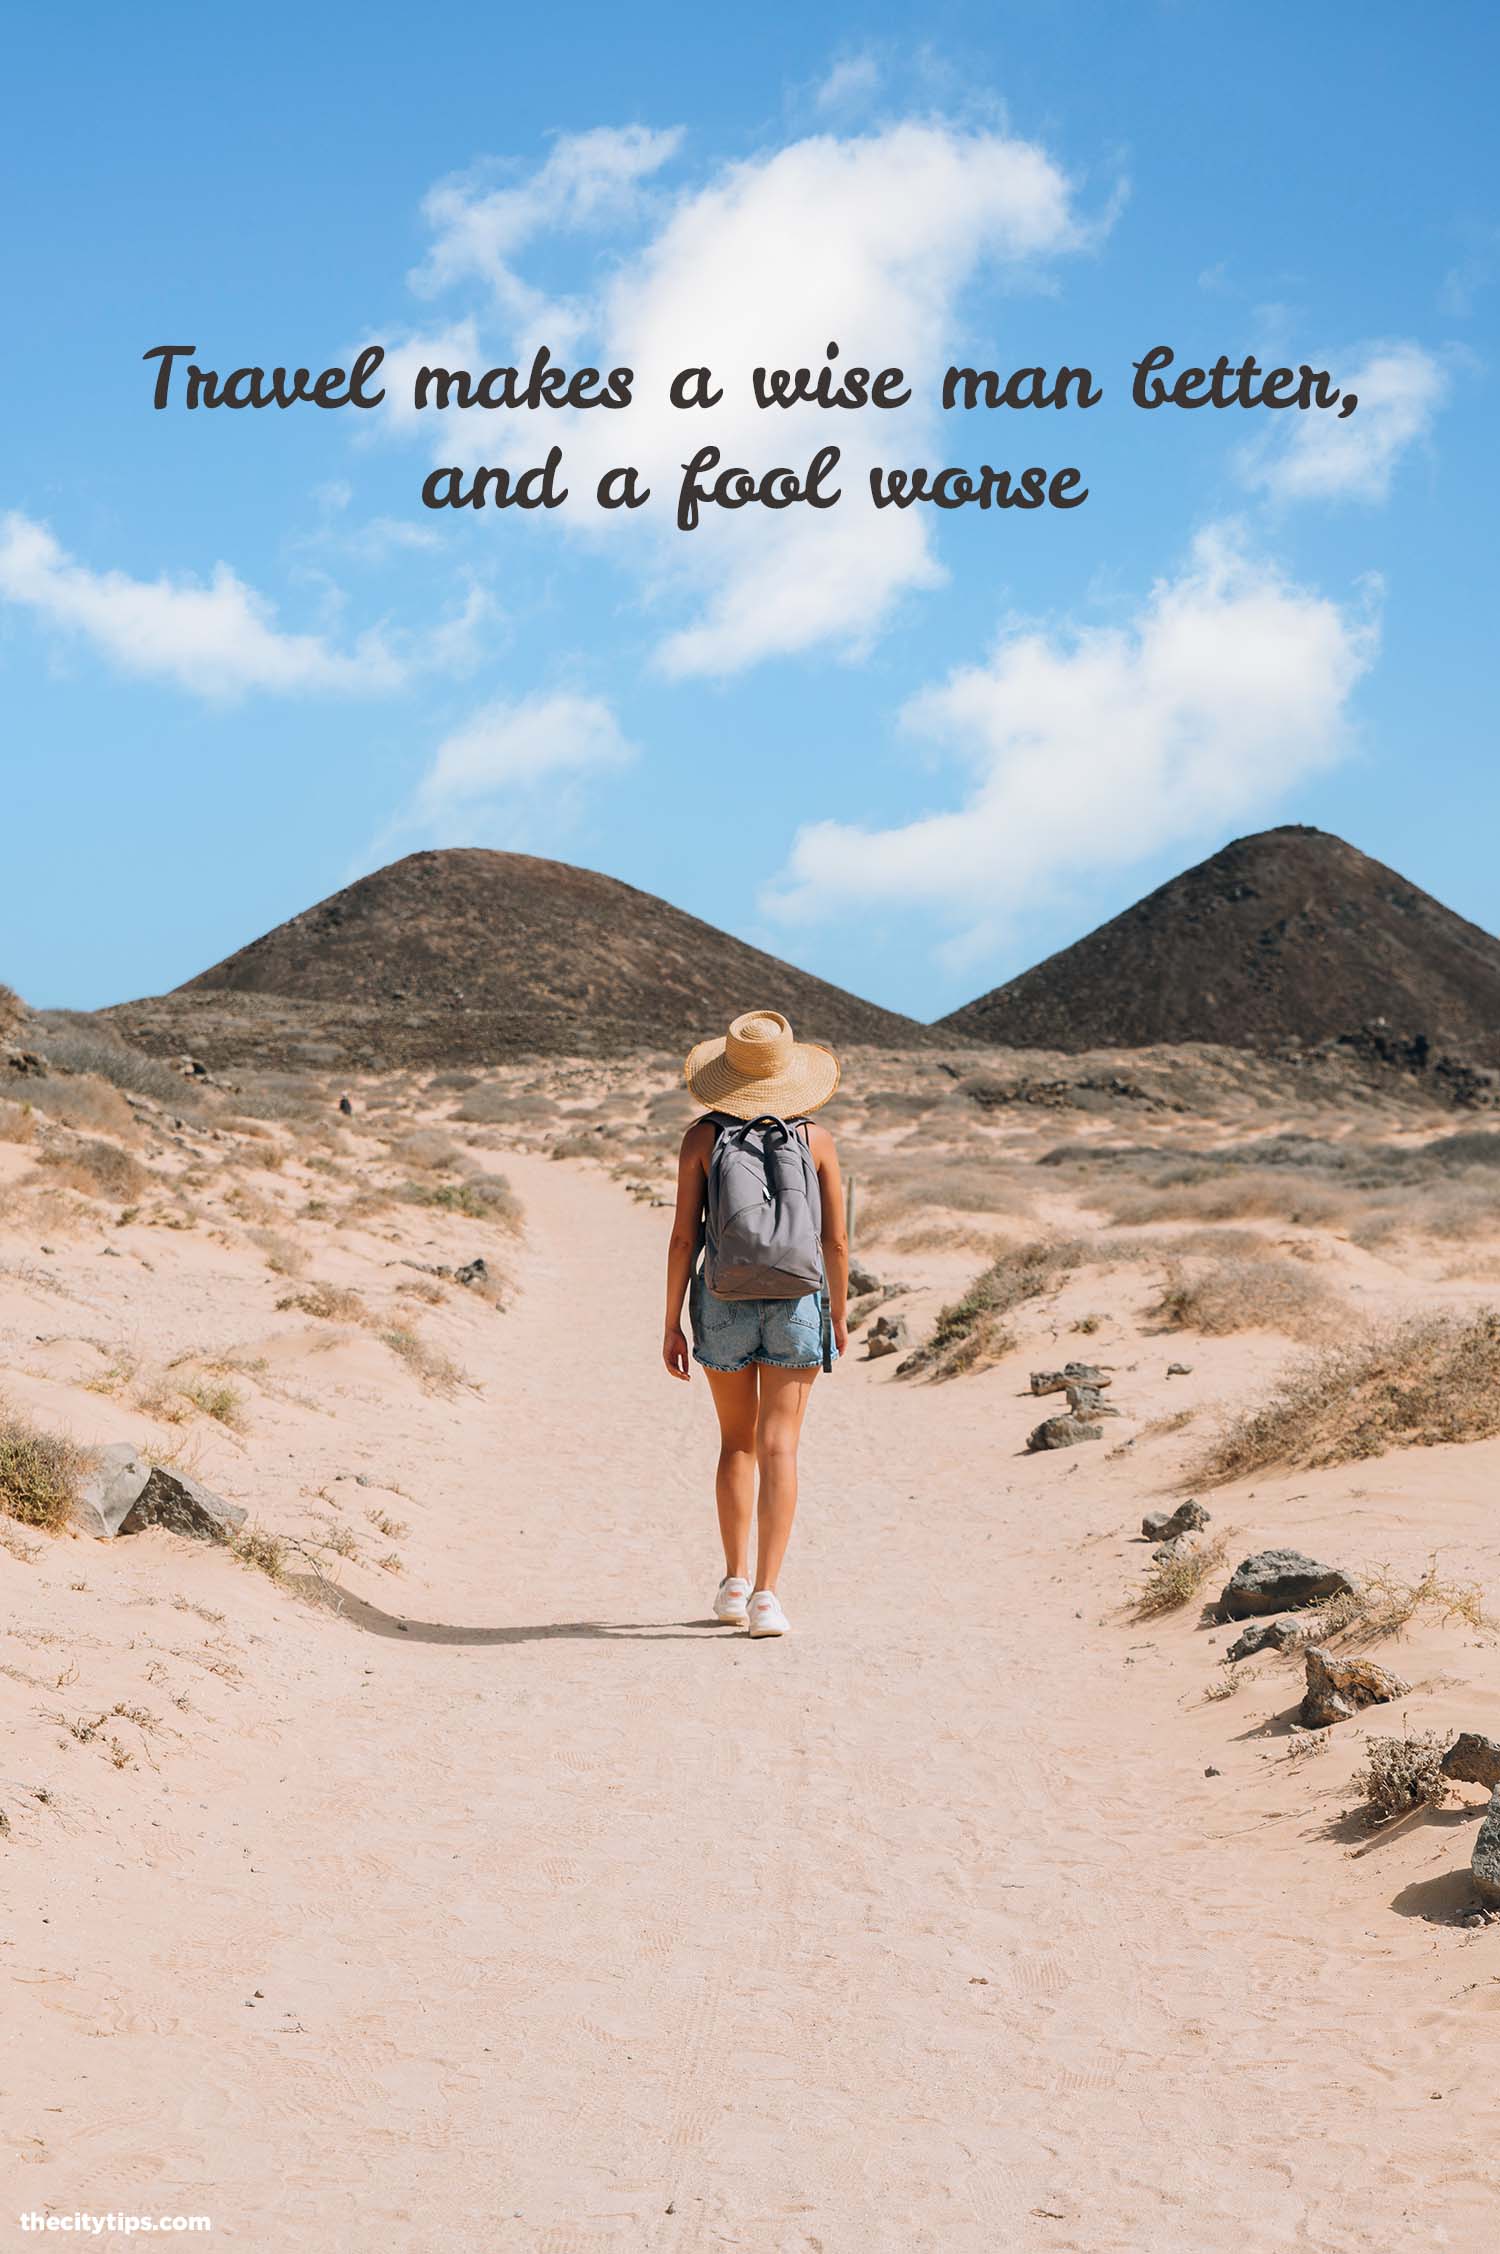 "Travel makes a wise man better, and a fool worse." by Thomas Fuller